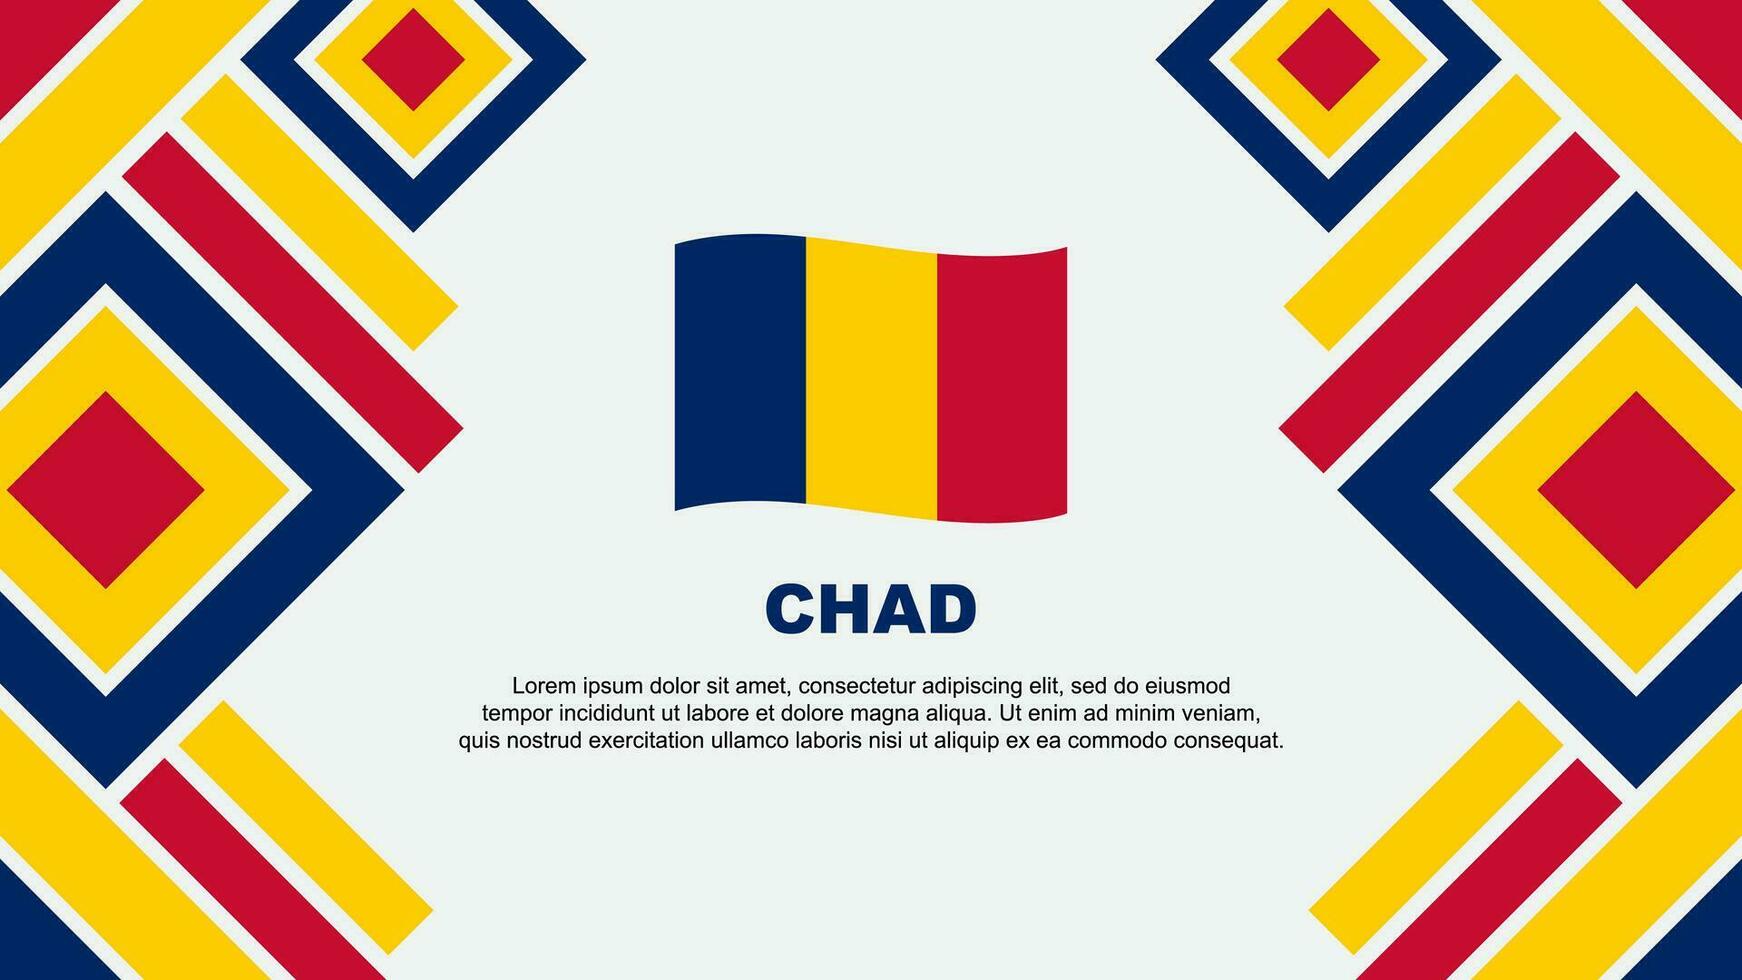 Chad Flag Abstract Background Design Template. Chad Independence Day Banner Wallpaper Vector Illustration. Chad